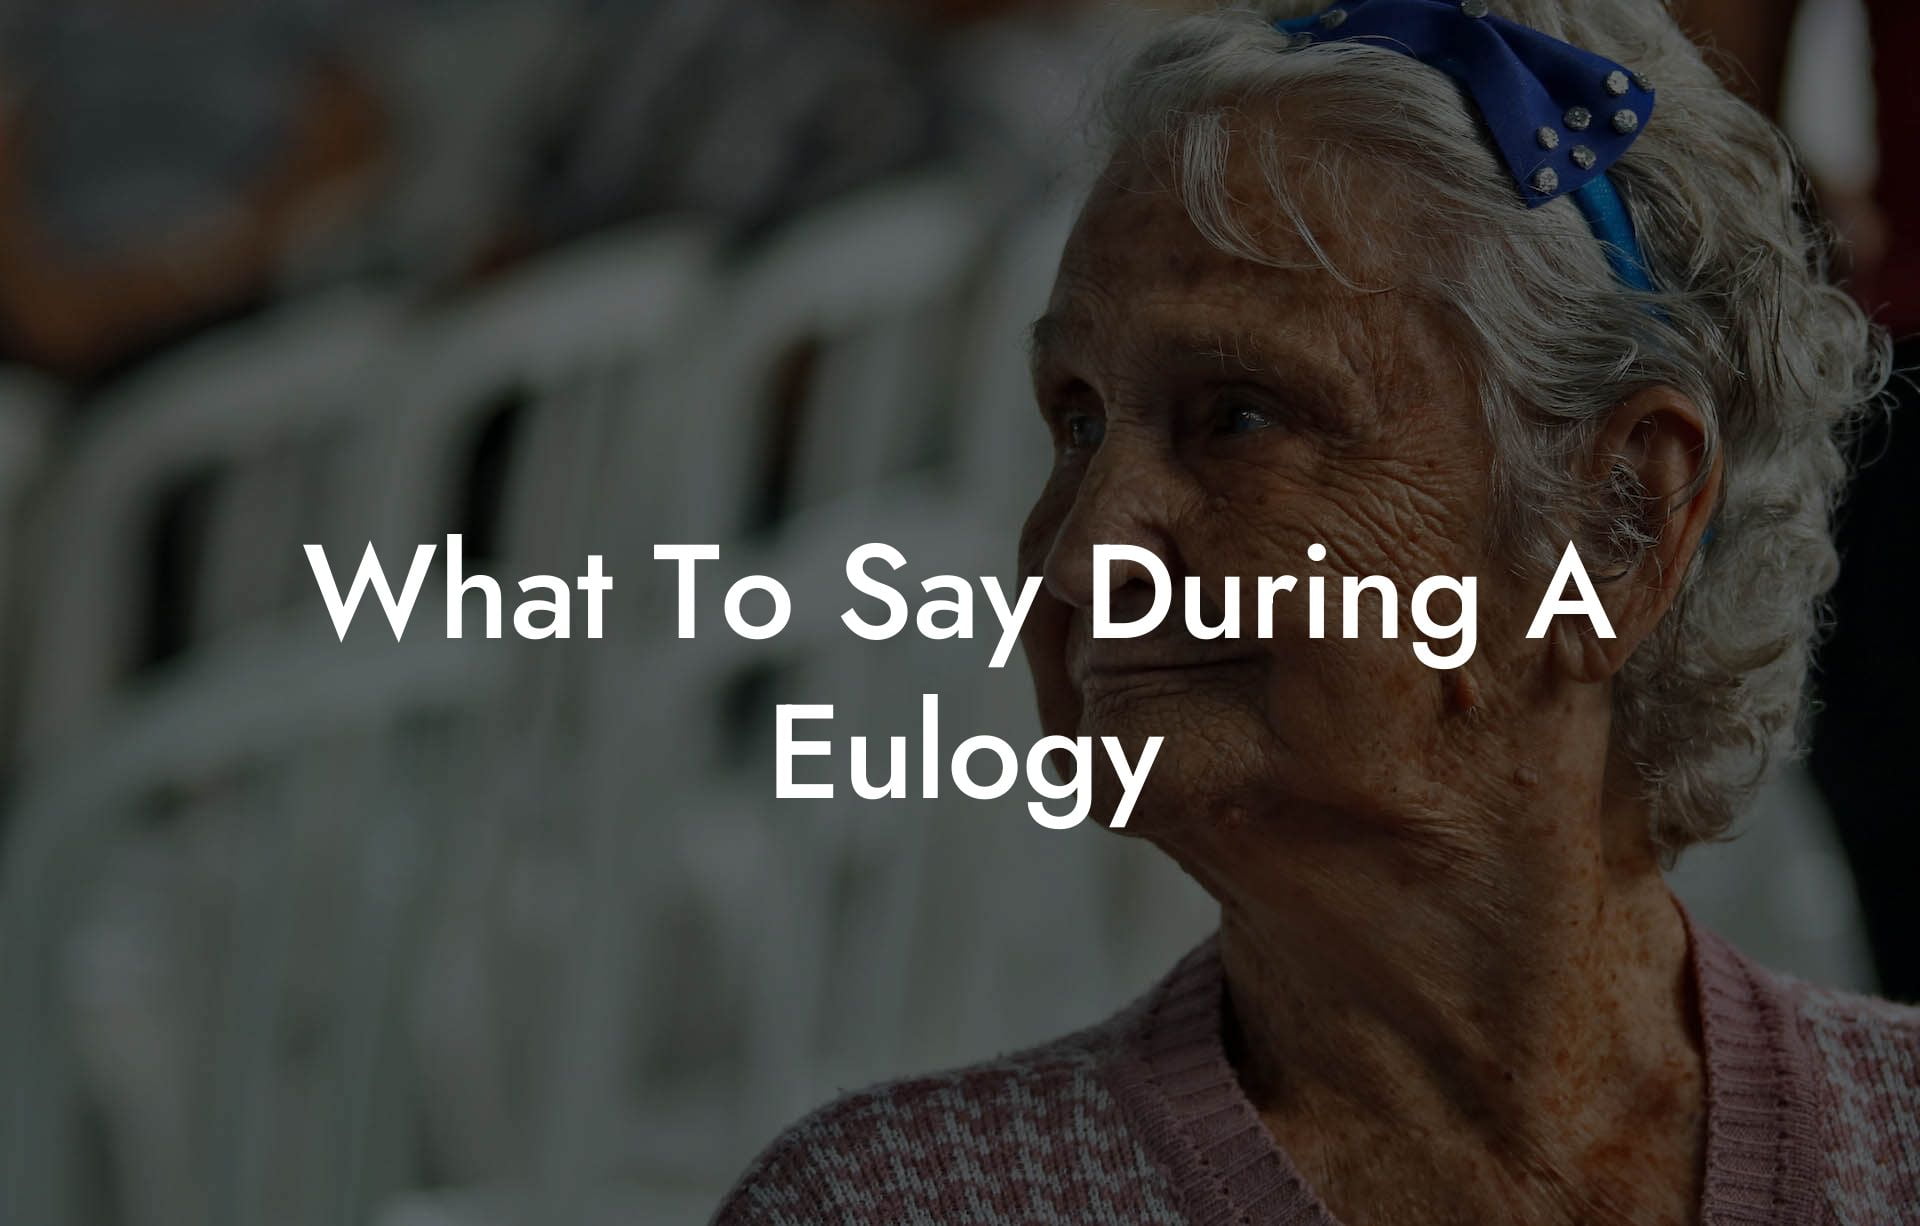 What To Say During A Eulogy